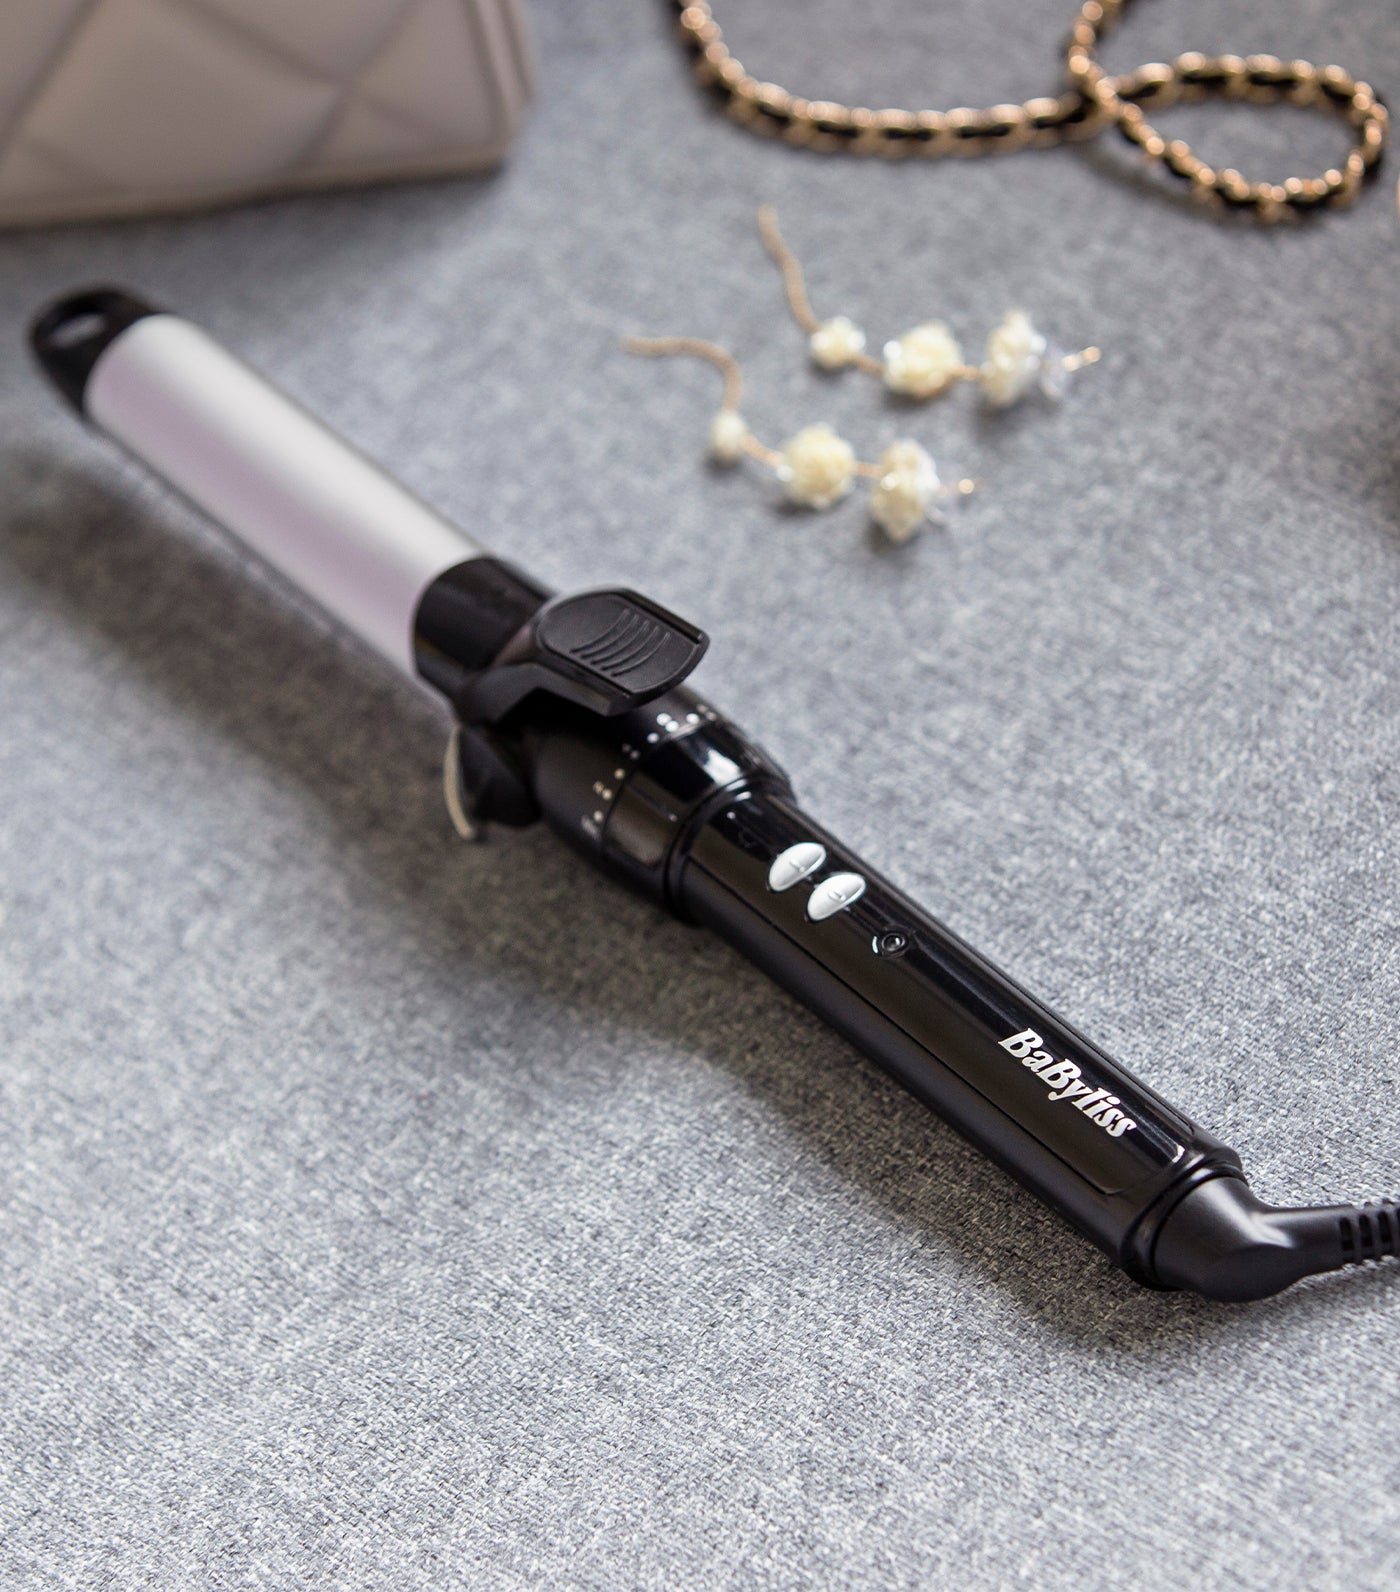 25mm Sublim’ Touch Pro 180 Curling Iron